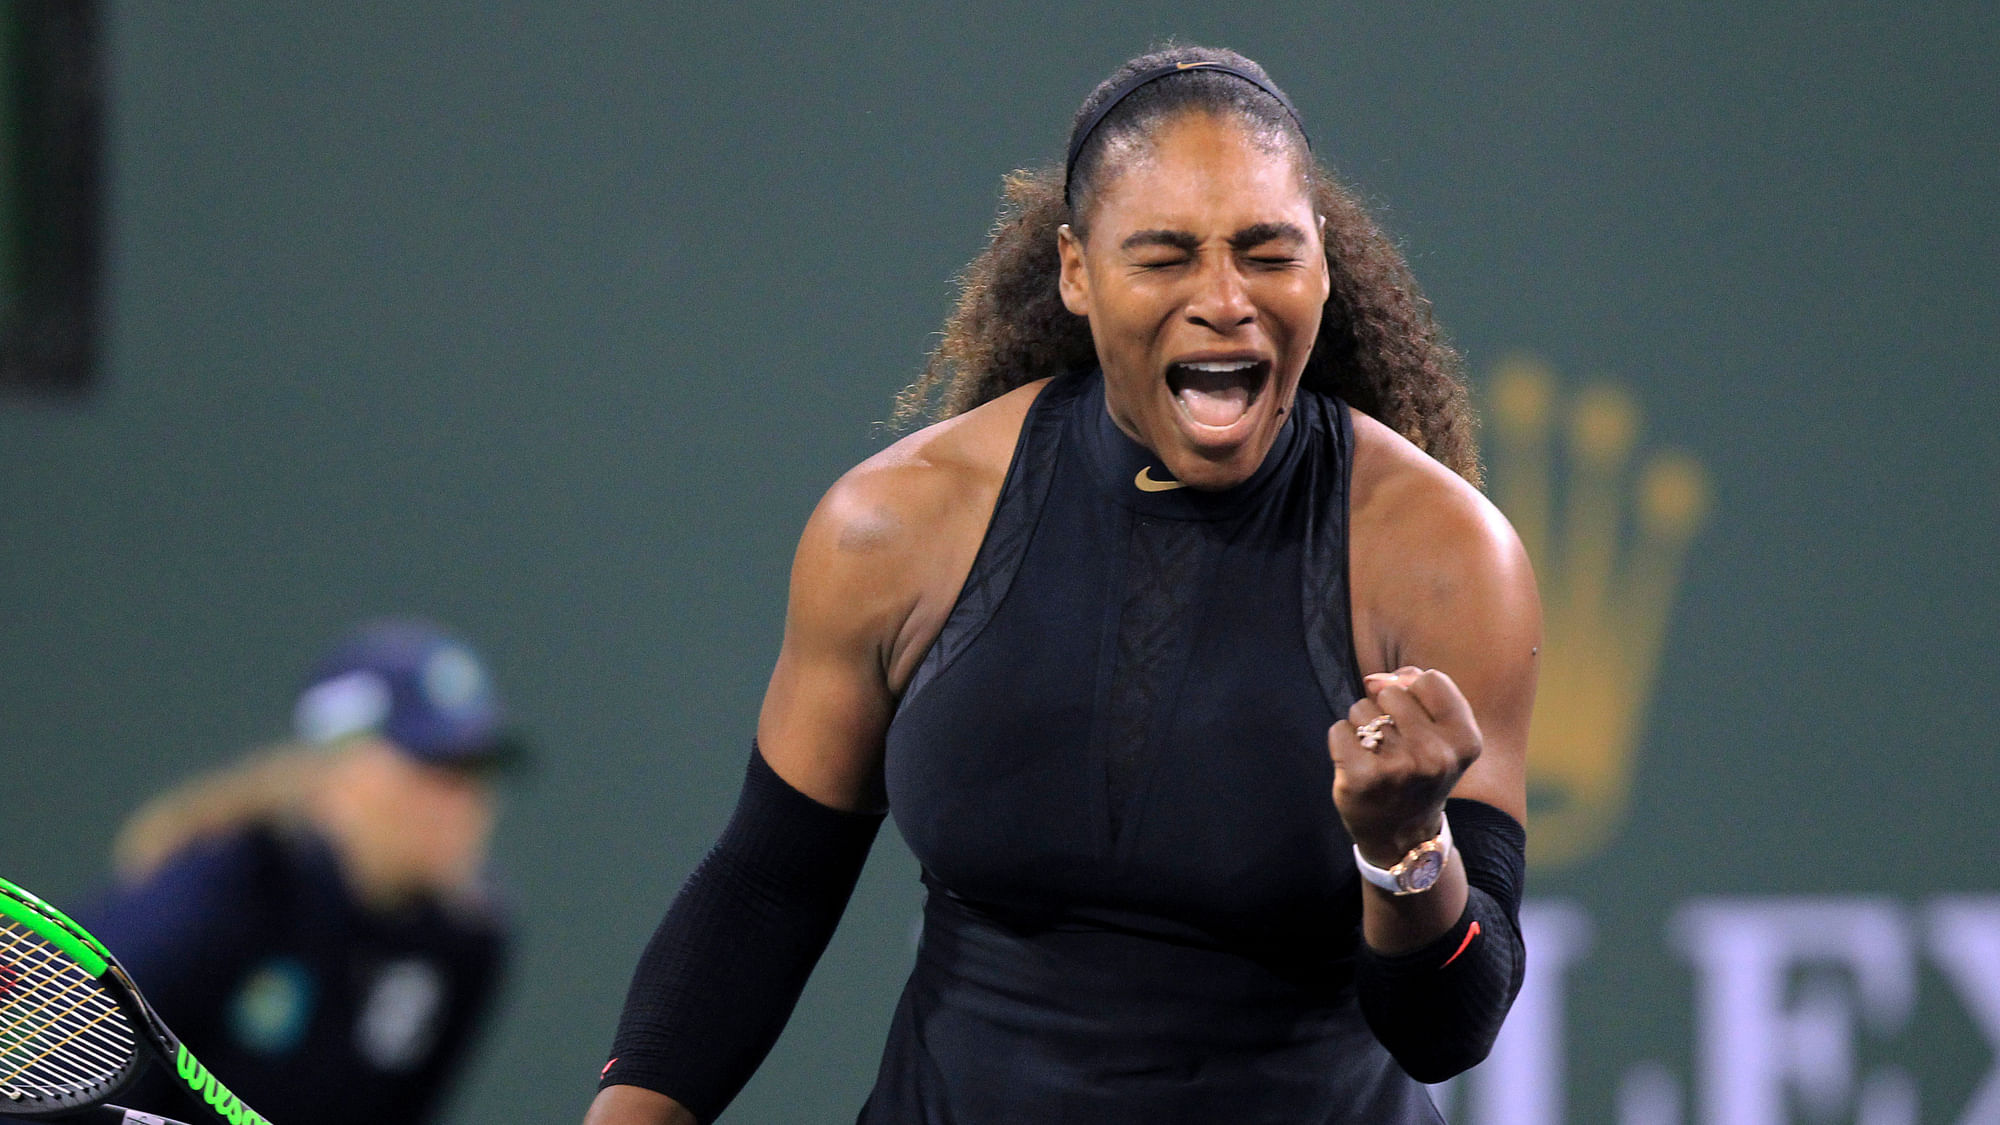 Serena Williams once again comes into the Australian Open as a favorite for the title.